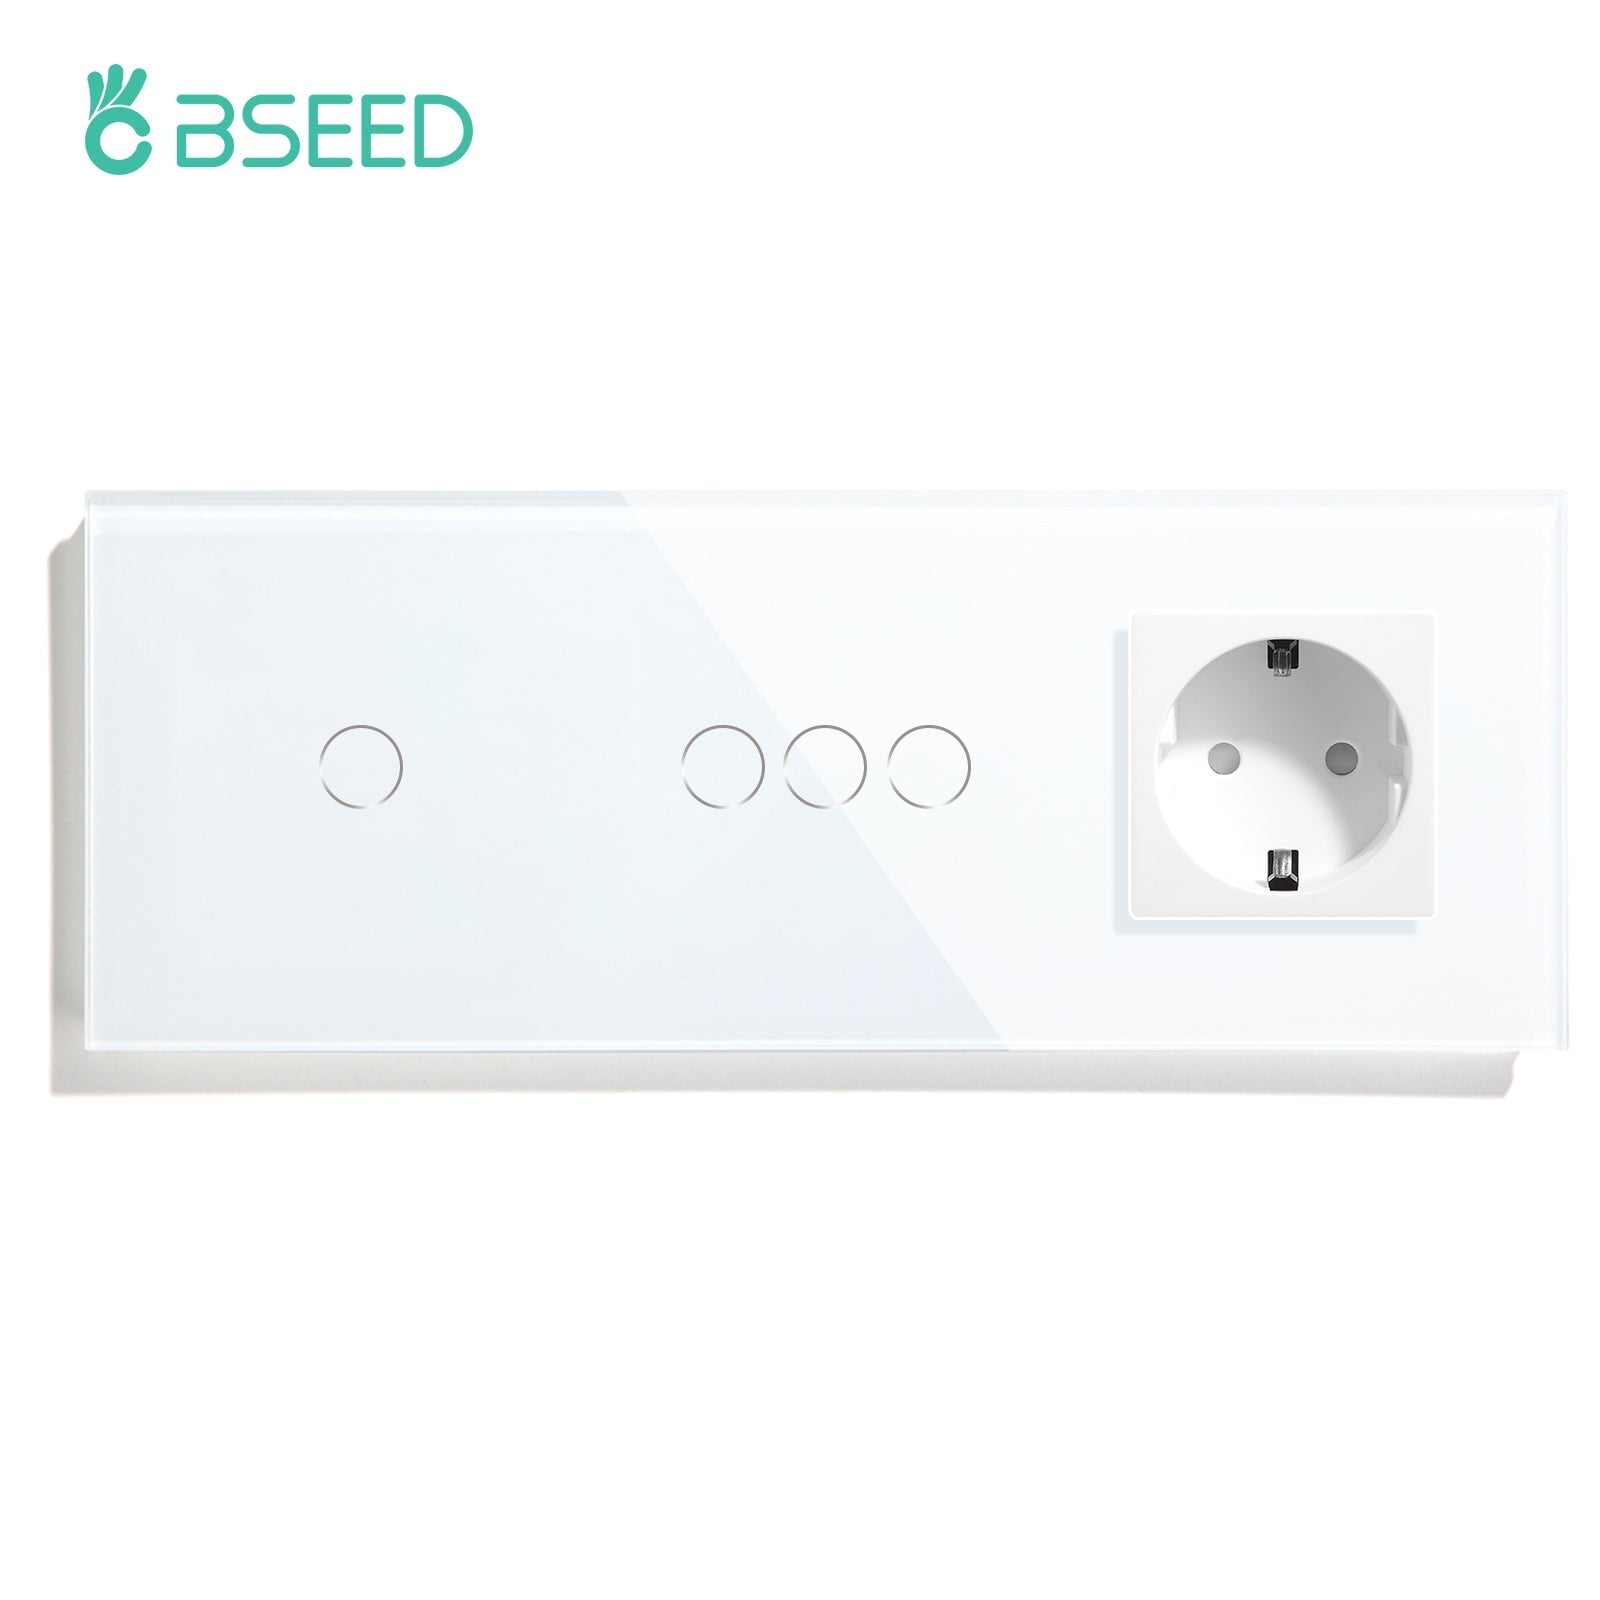 BSEED Double Touch 1/2/3 Gnag 1/2/3 Way Light Switch With EU Socket Power Outlets & Sockets Bseedswitch White 1gang+3gang 1Way